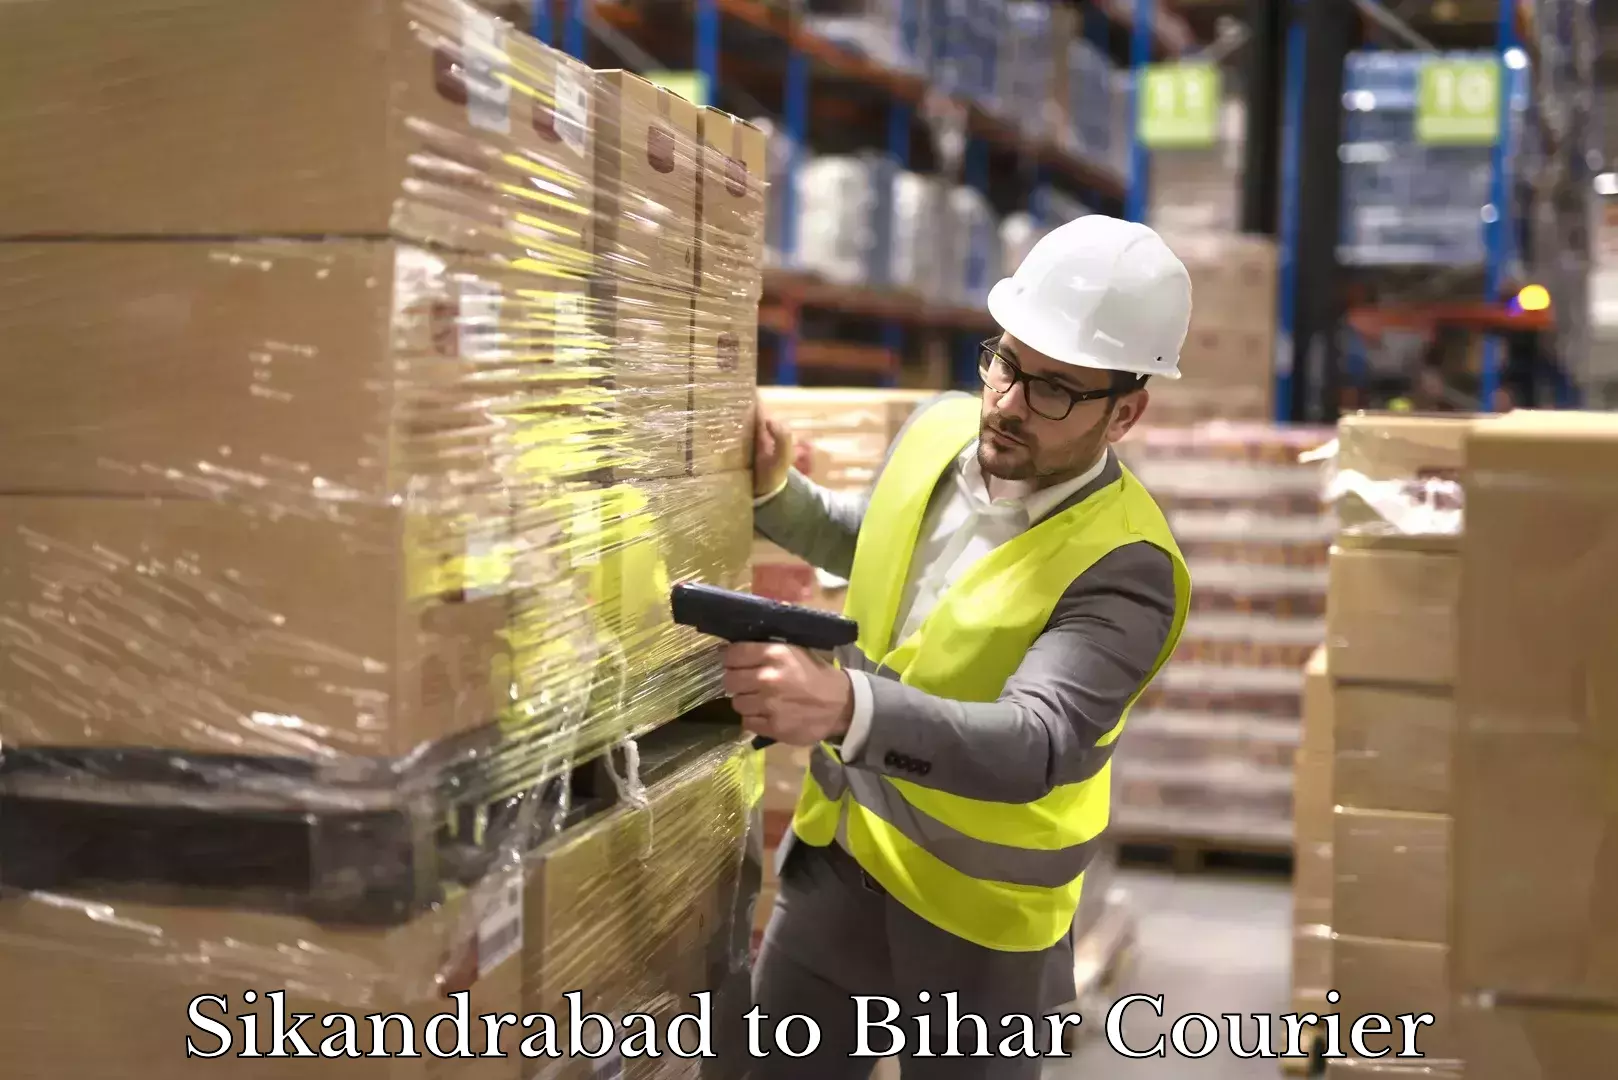 24/7 shipping services in Sikandrabad to Bihar